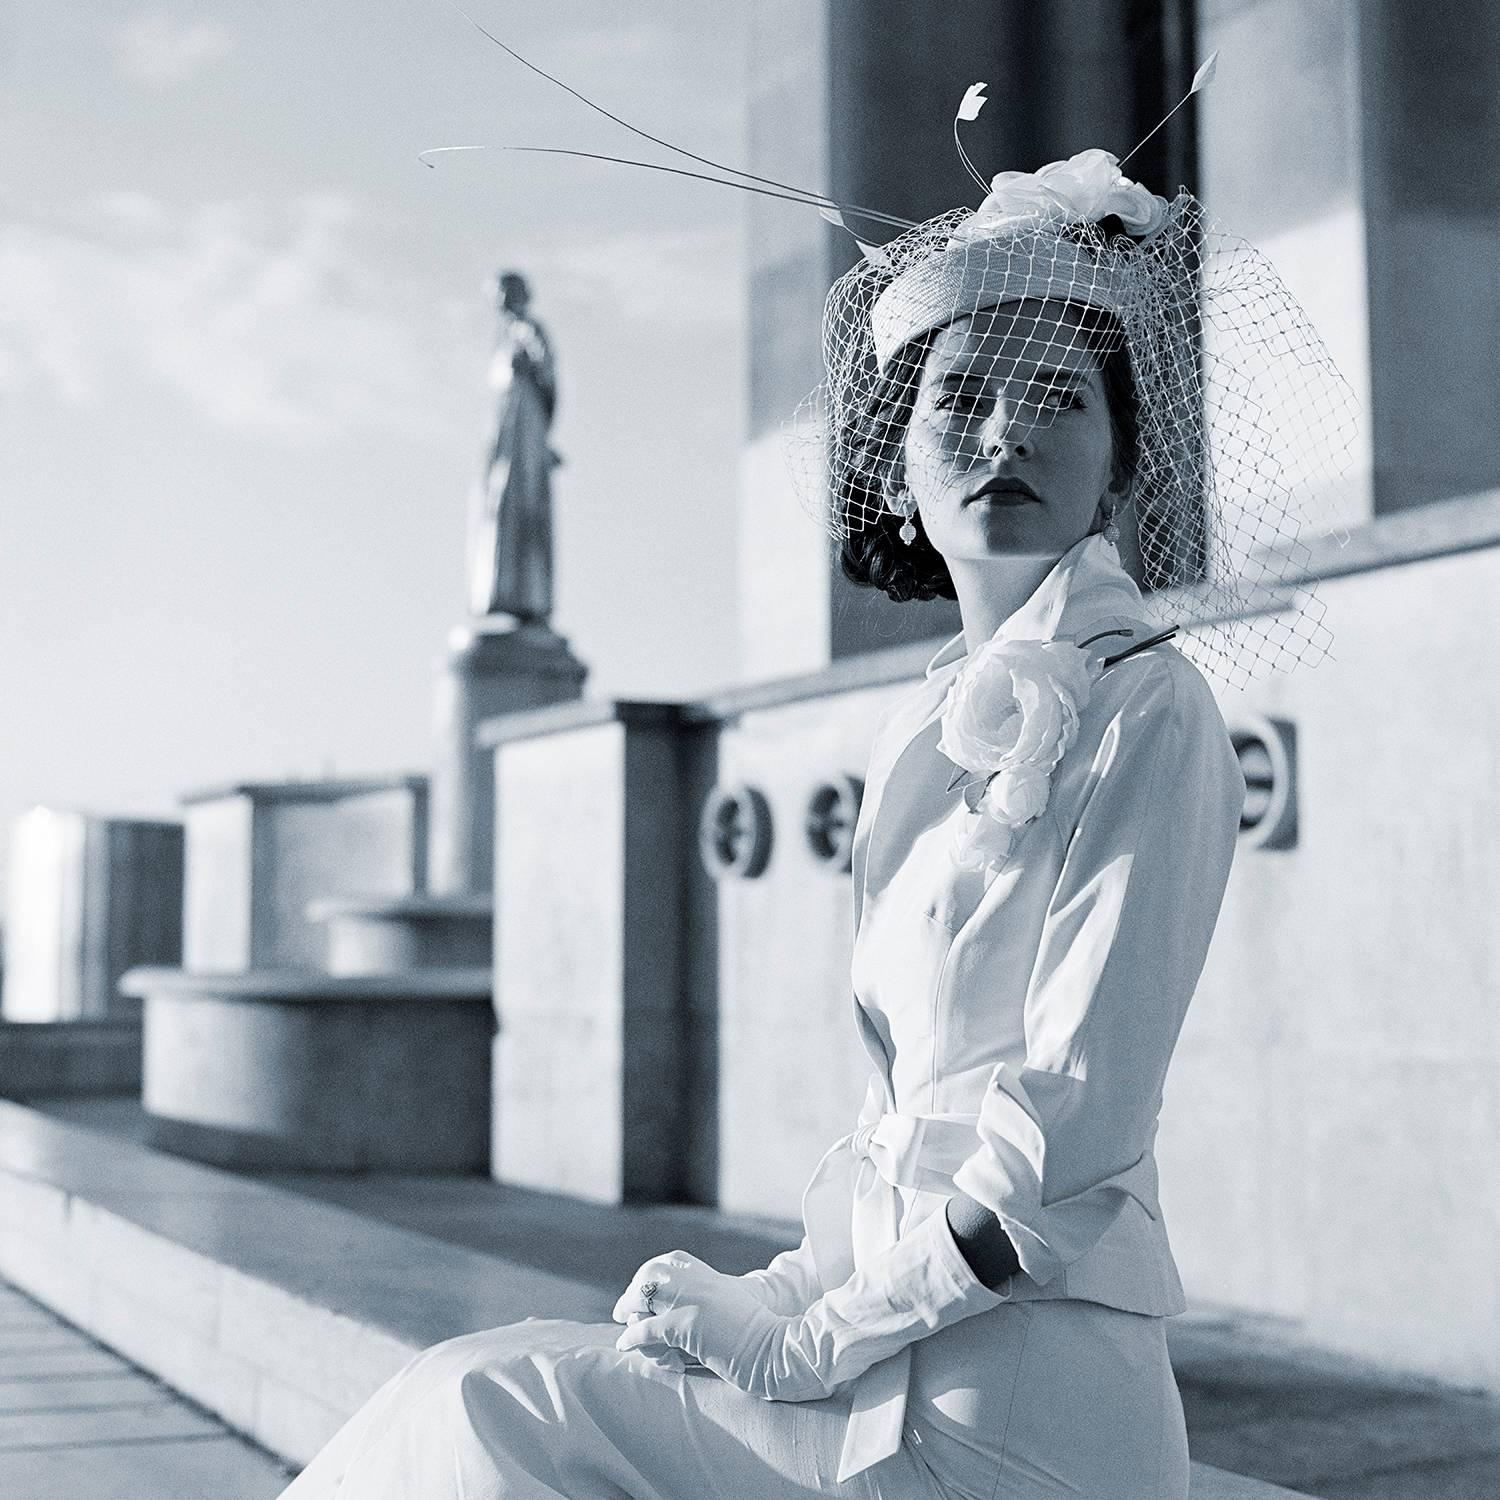 Rodney Smith Black and White Photograph - Mira Seated in Trocadero, Paris, France-20 x 20 inch black and white photograph